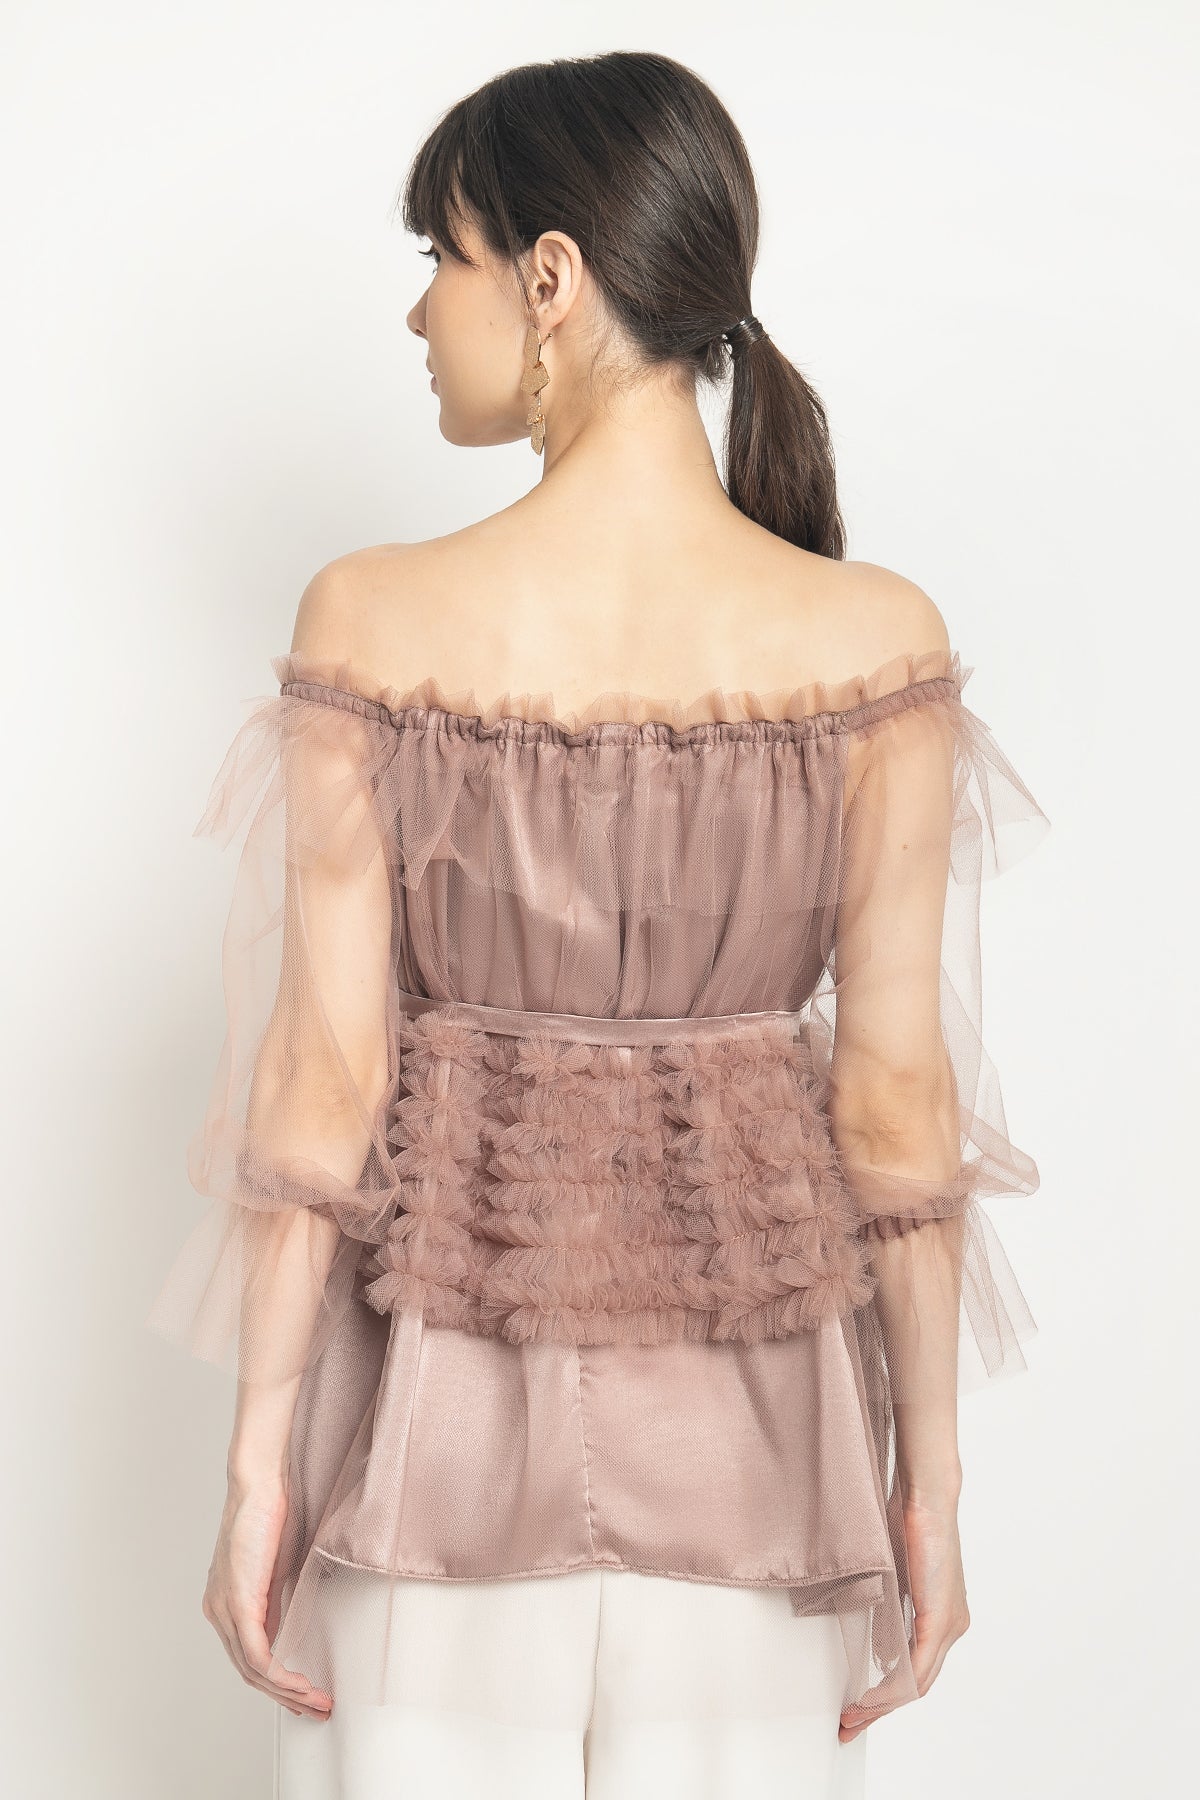 Airin Top in Pink Mauve